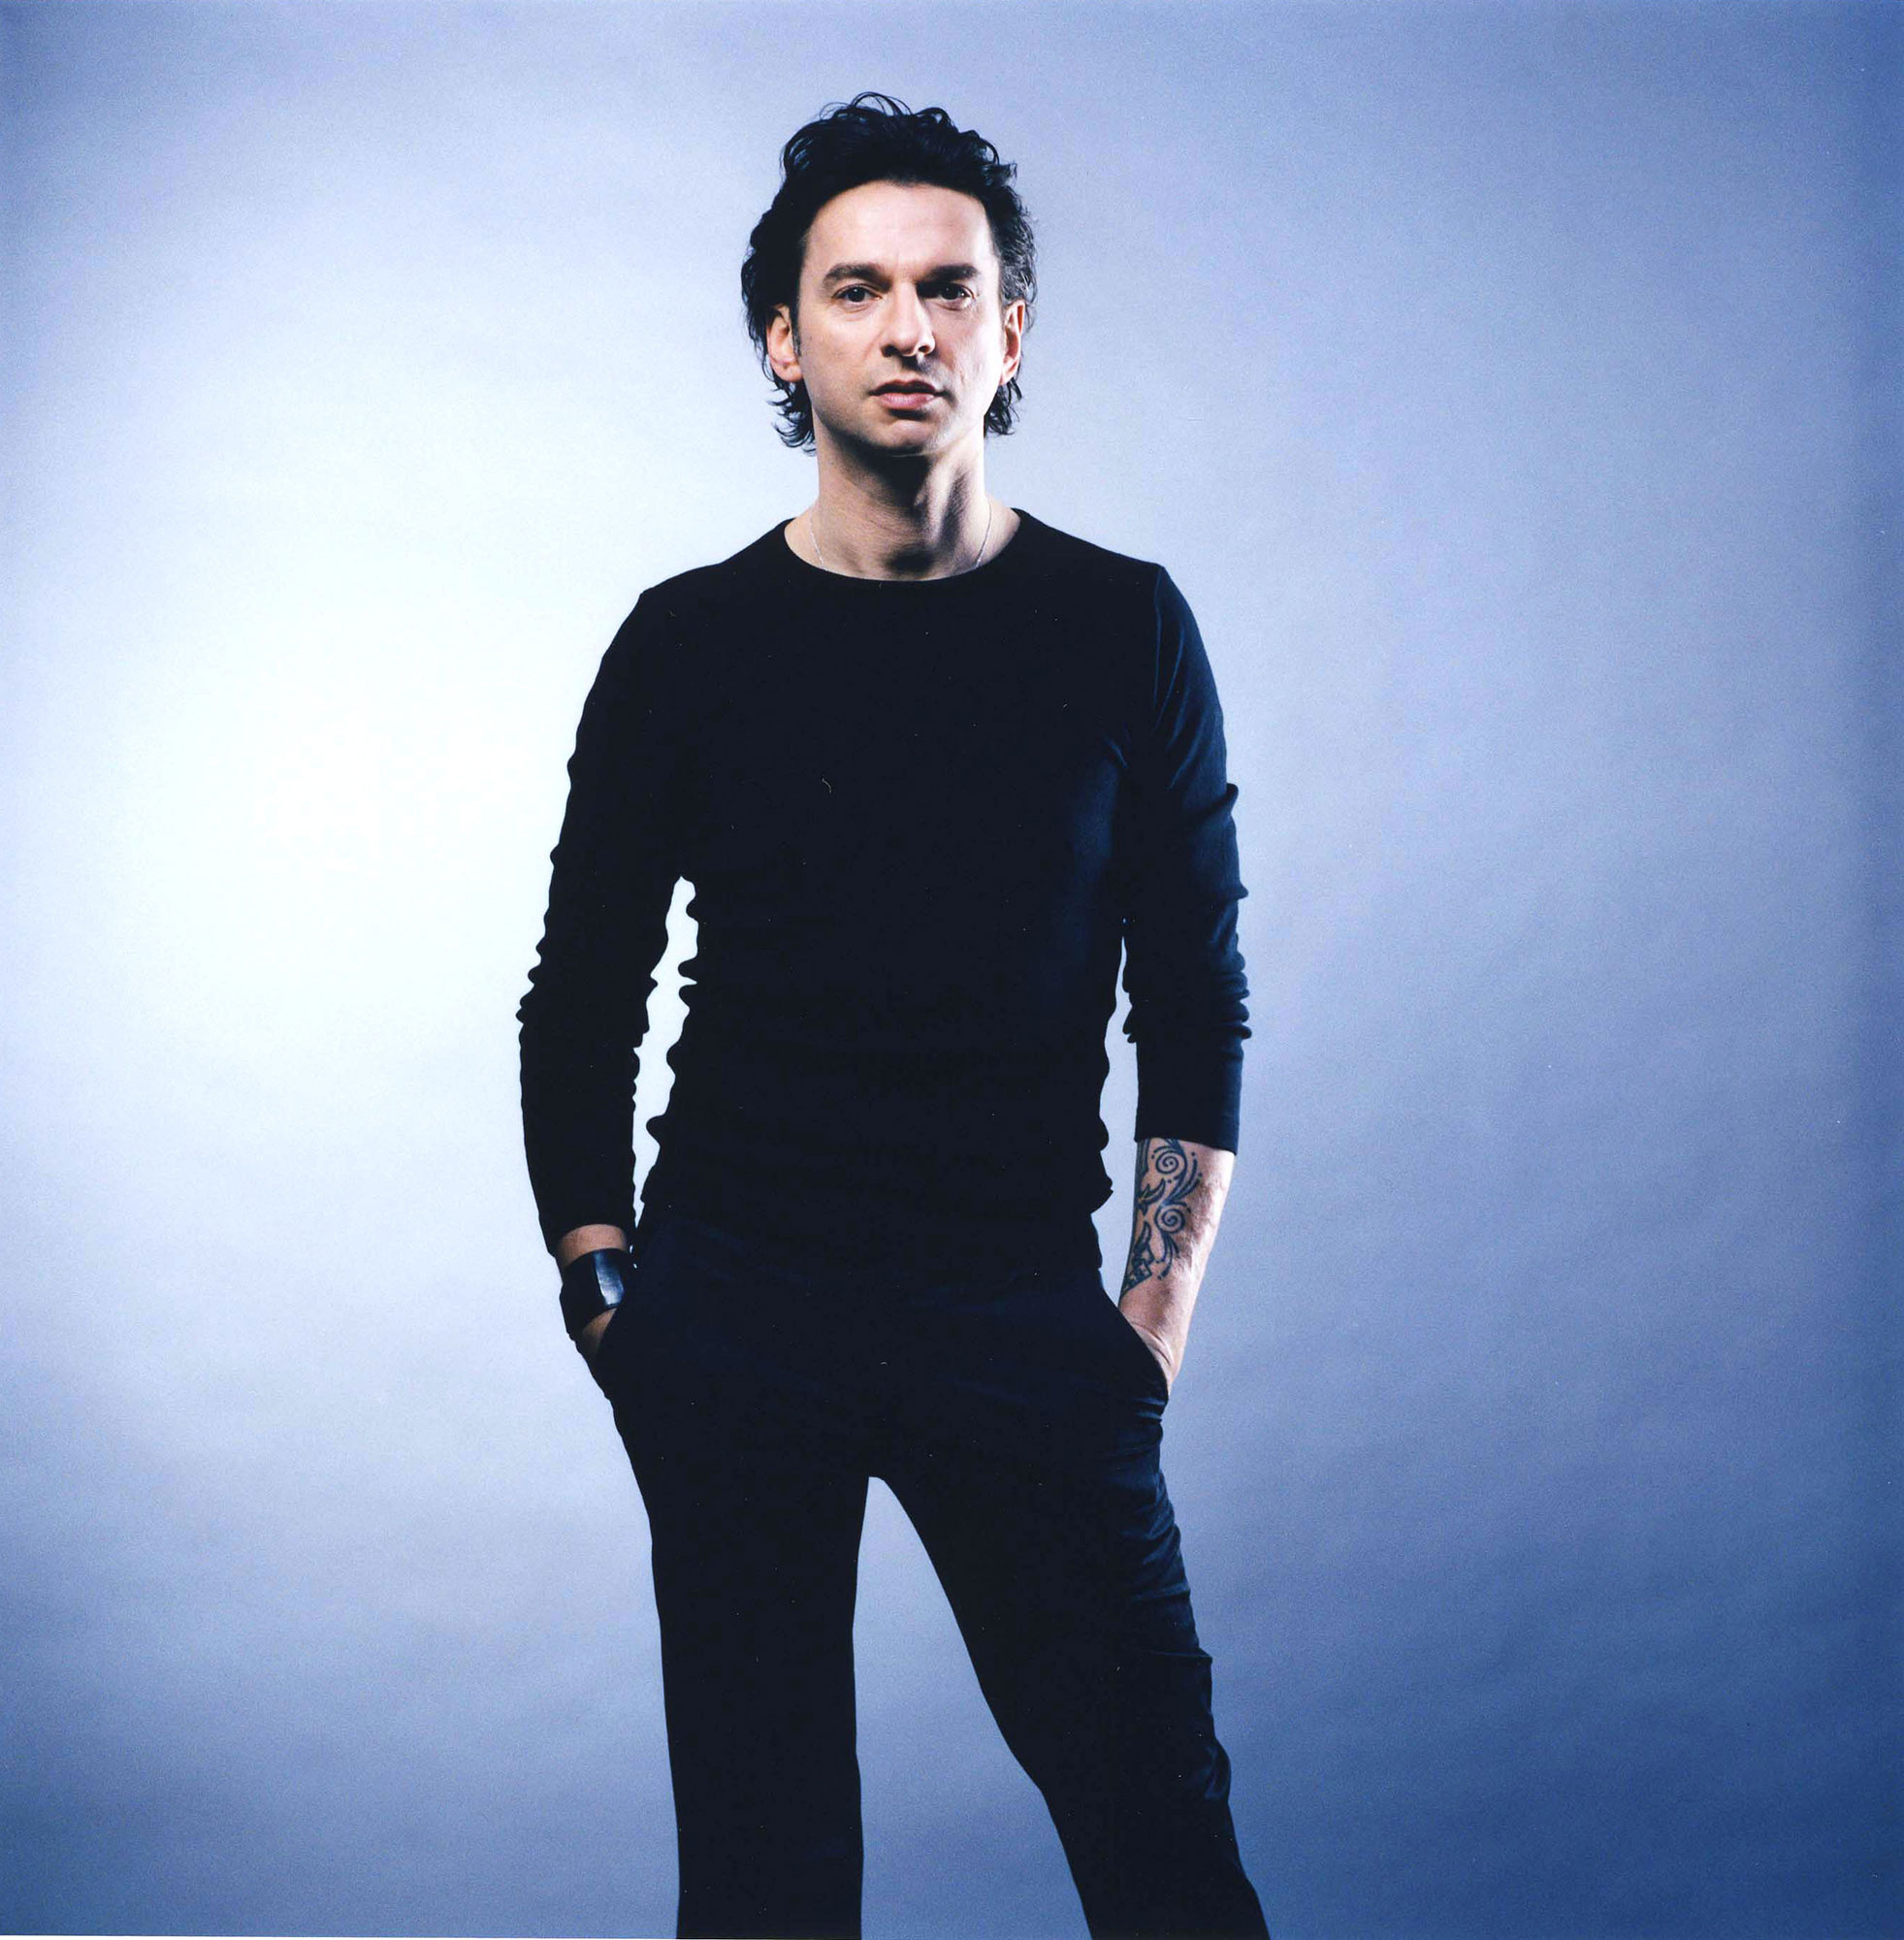 Dave Gahan wallpapers, Music, HQ Dave Gahan pictures | 4K Wallpapers 2019 1970x2000